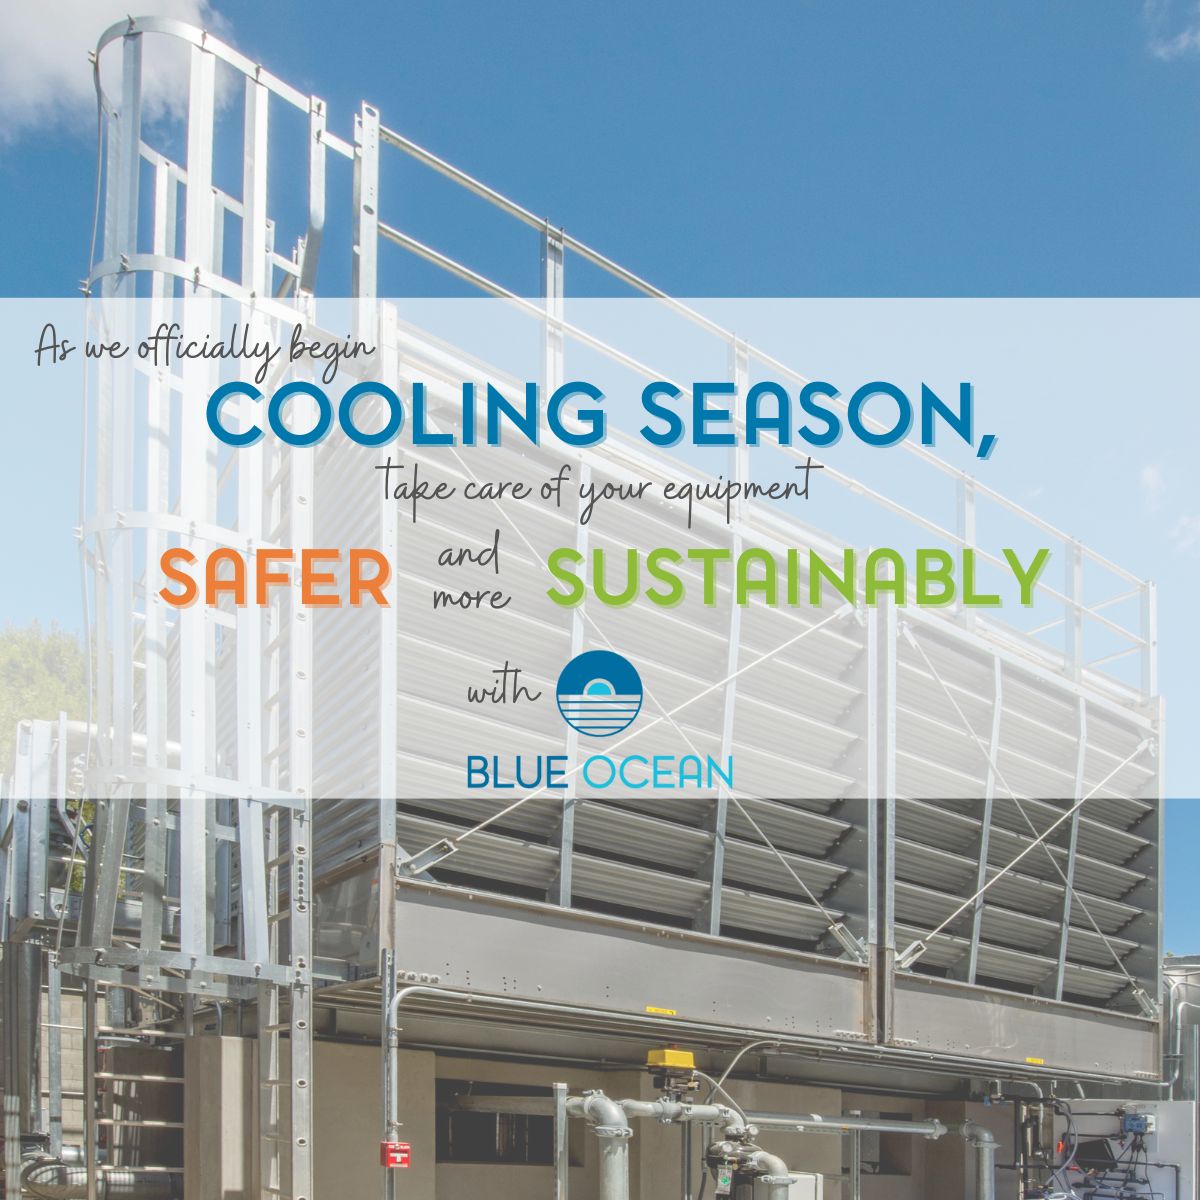 Cooling season is officially here and there is no better time to make sure equipment is protected and running efficiently.
 
Do that with water treatment that is SAFER and more SUSTAIN...linkedin.com/feed/update/ur…

#DitchTheDrum #BePartOfTheSOLIDSolution